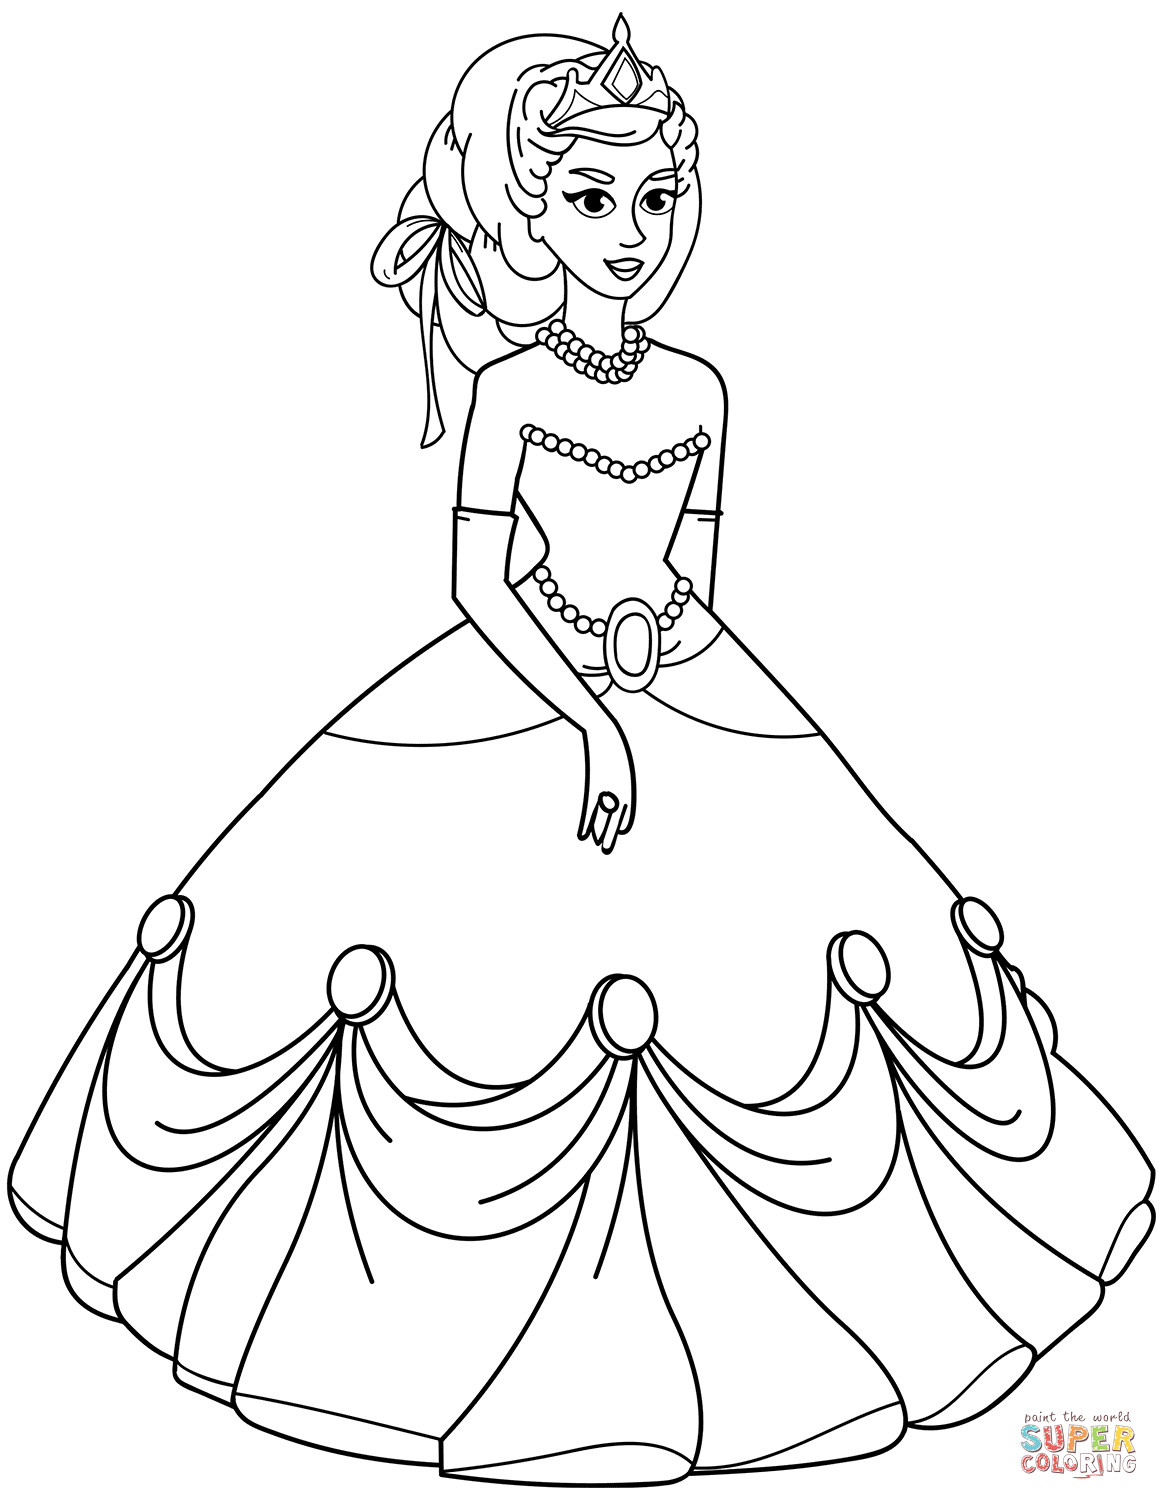 Princess Coloring Sheets For Girls
 Princess in Ball Gown Dress coloring page